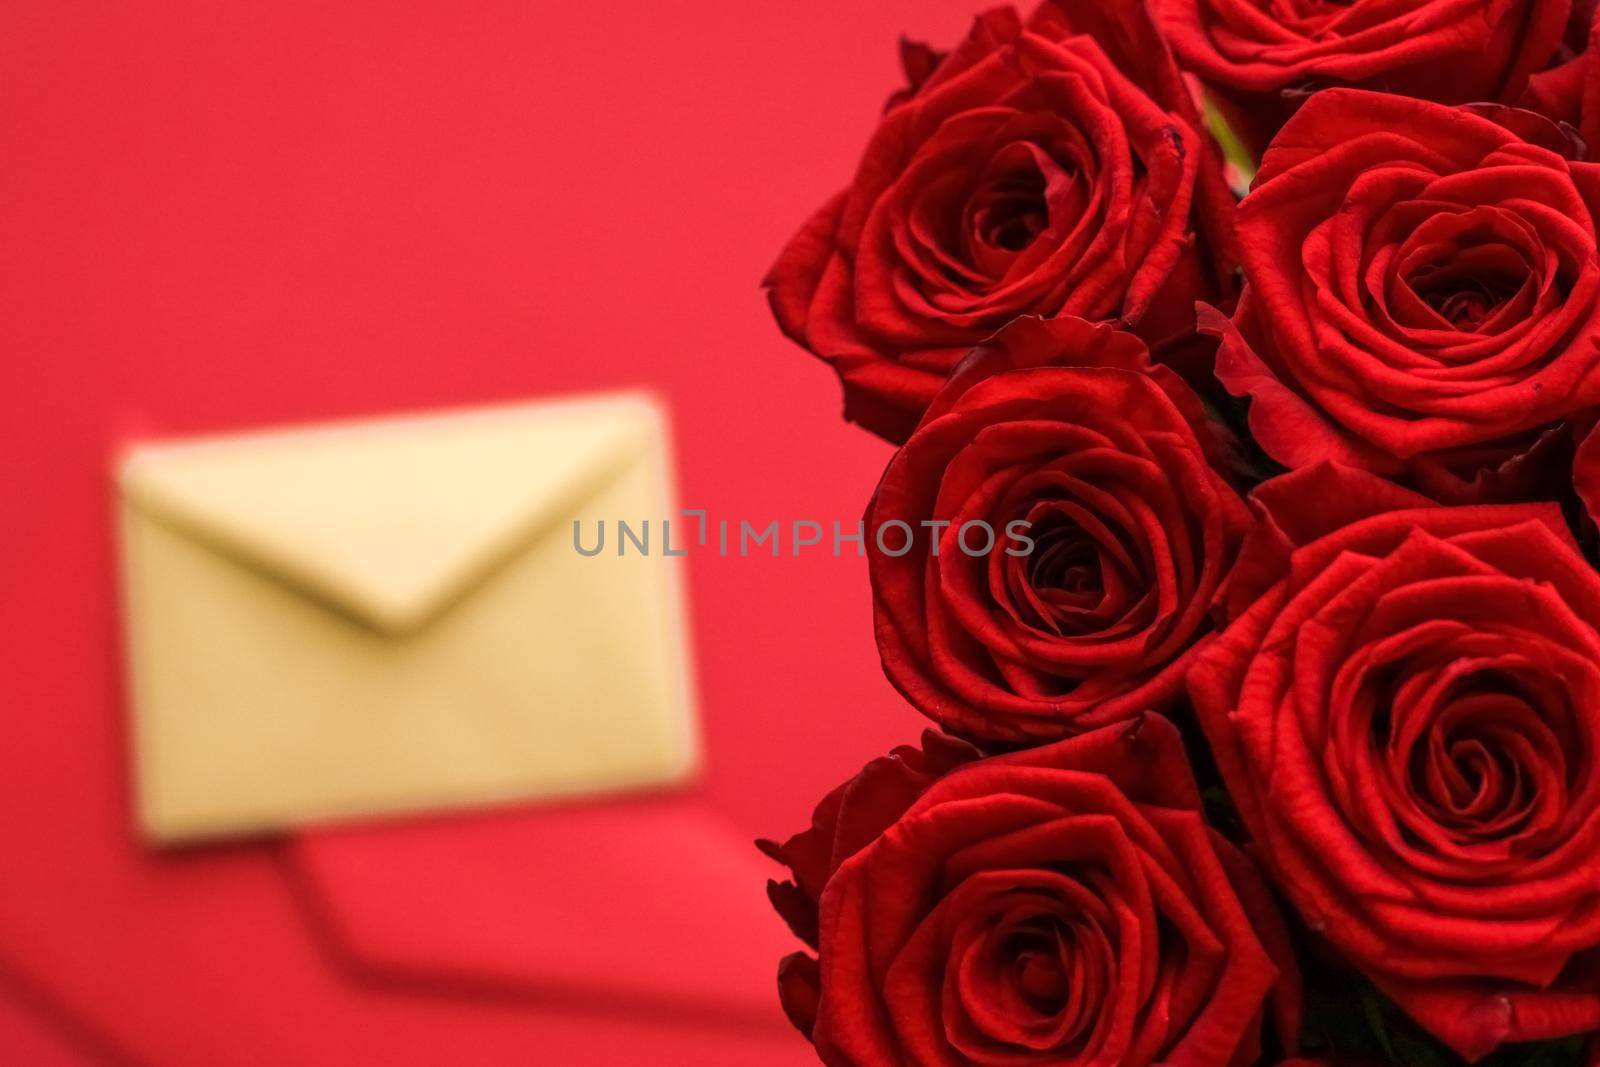 Love letter and flower delivery service on Valentines Day, luxury bouquet of red roses and card envelopes on red background by Anneleven